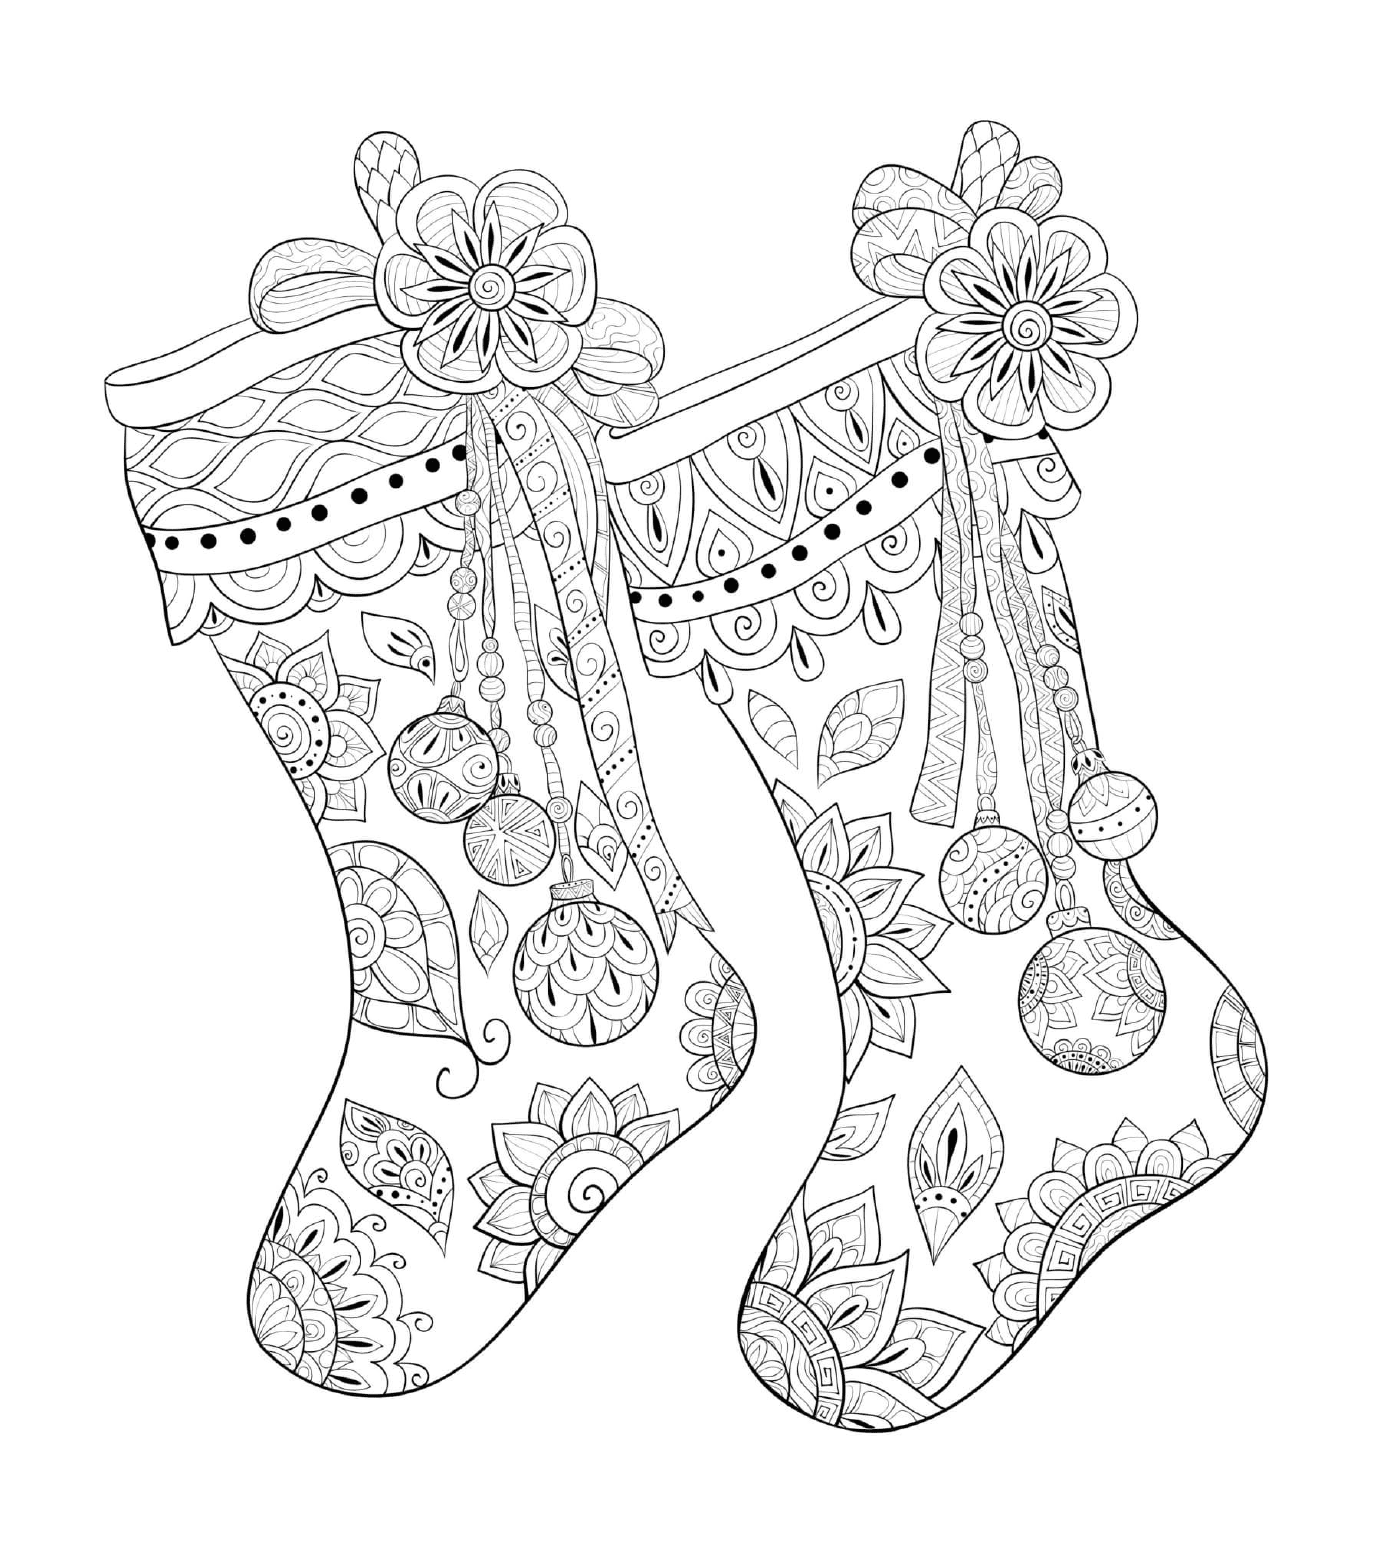  A pair of decorated Christmas stockings 